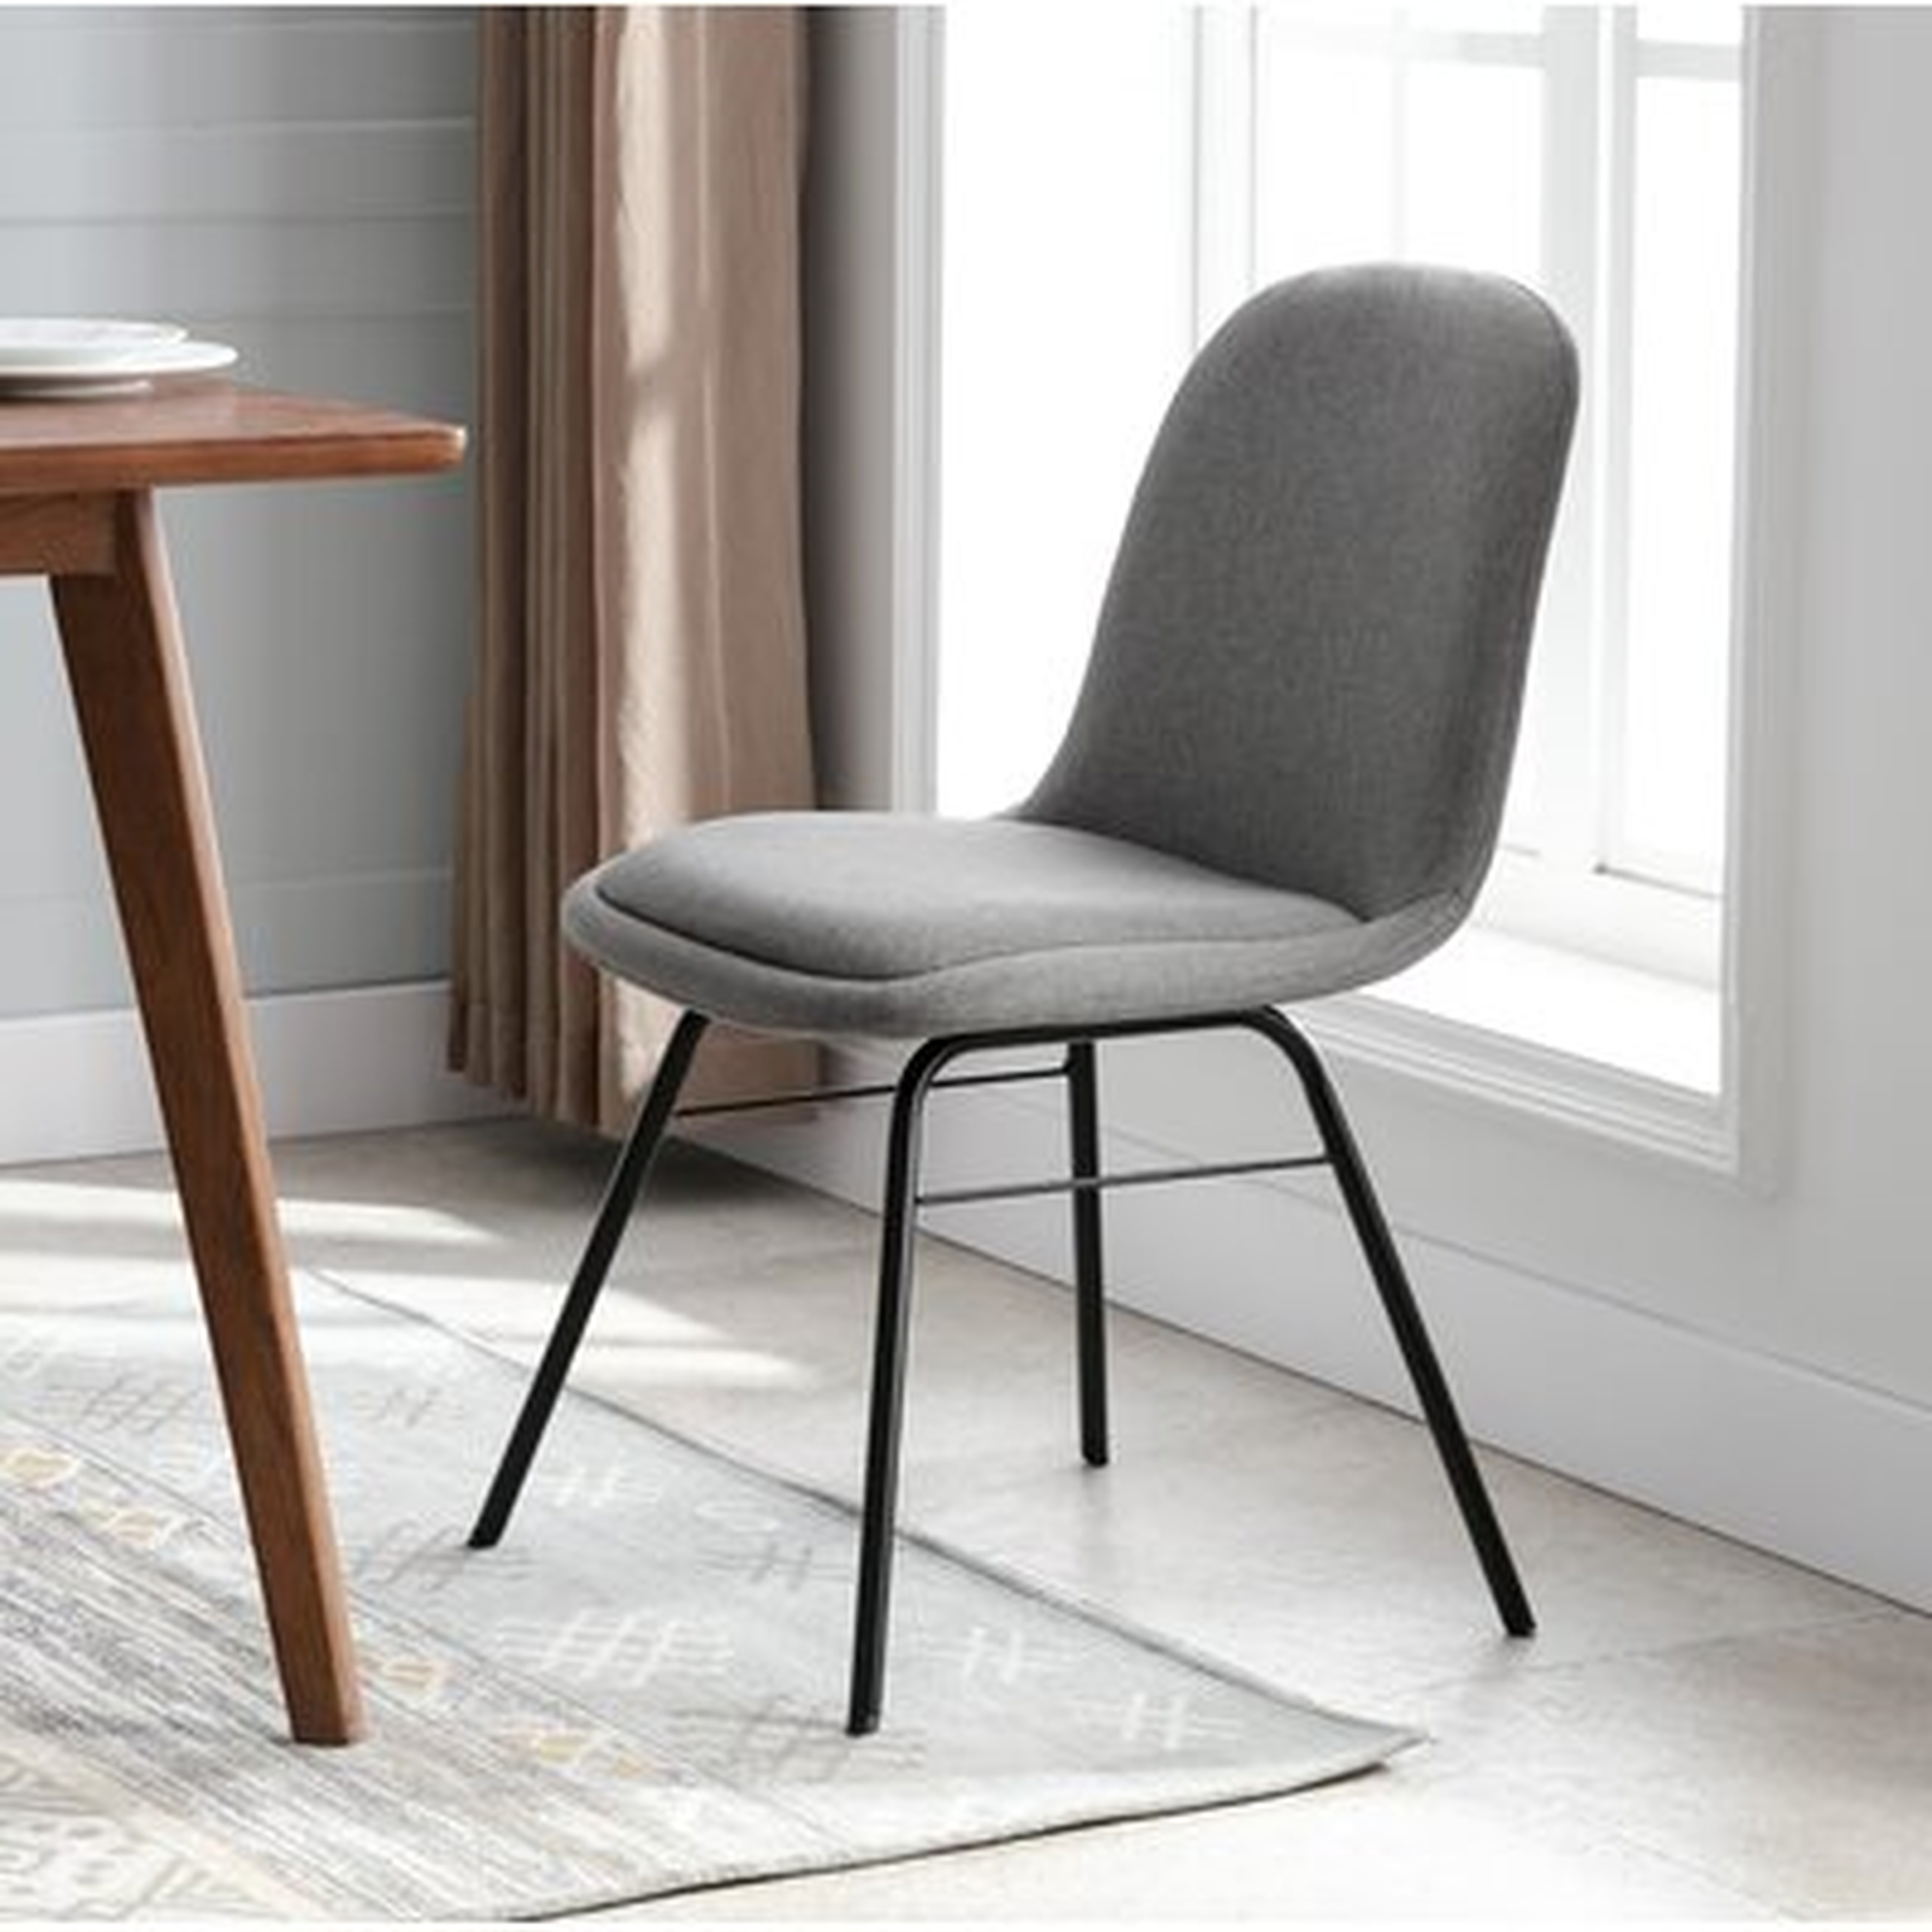 Westboro Upholstered Stacking Side Chair in Charcoal Gray - Wayfair